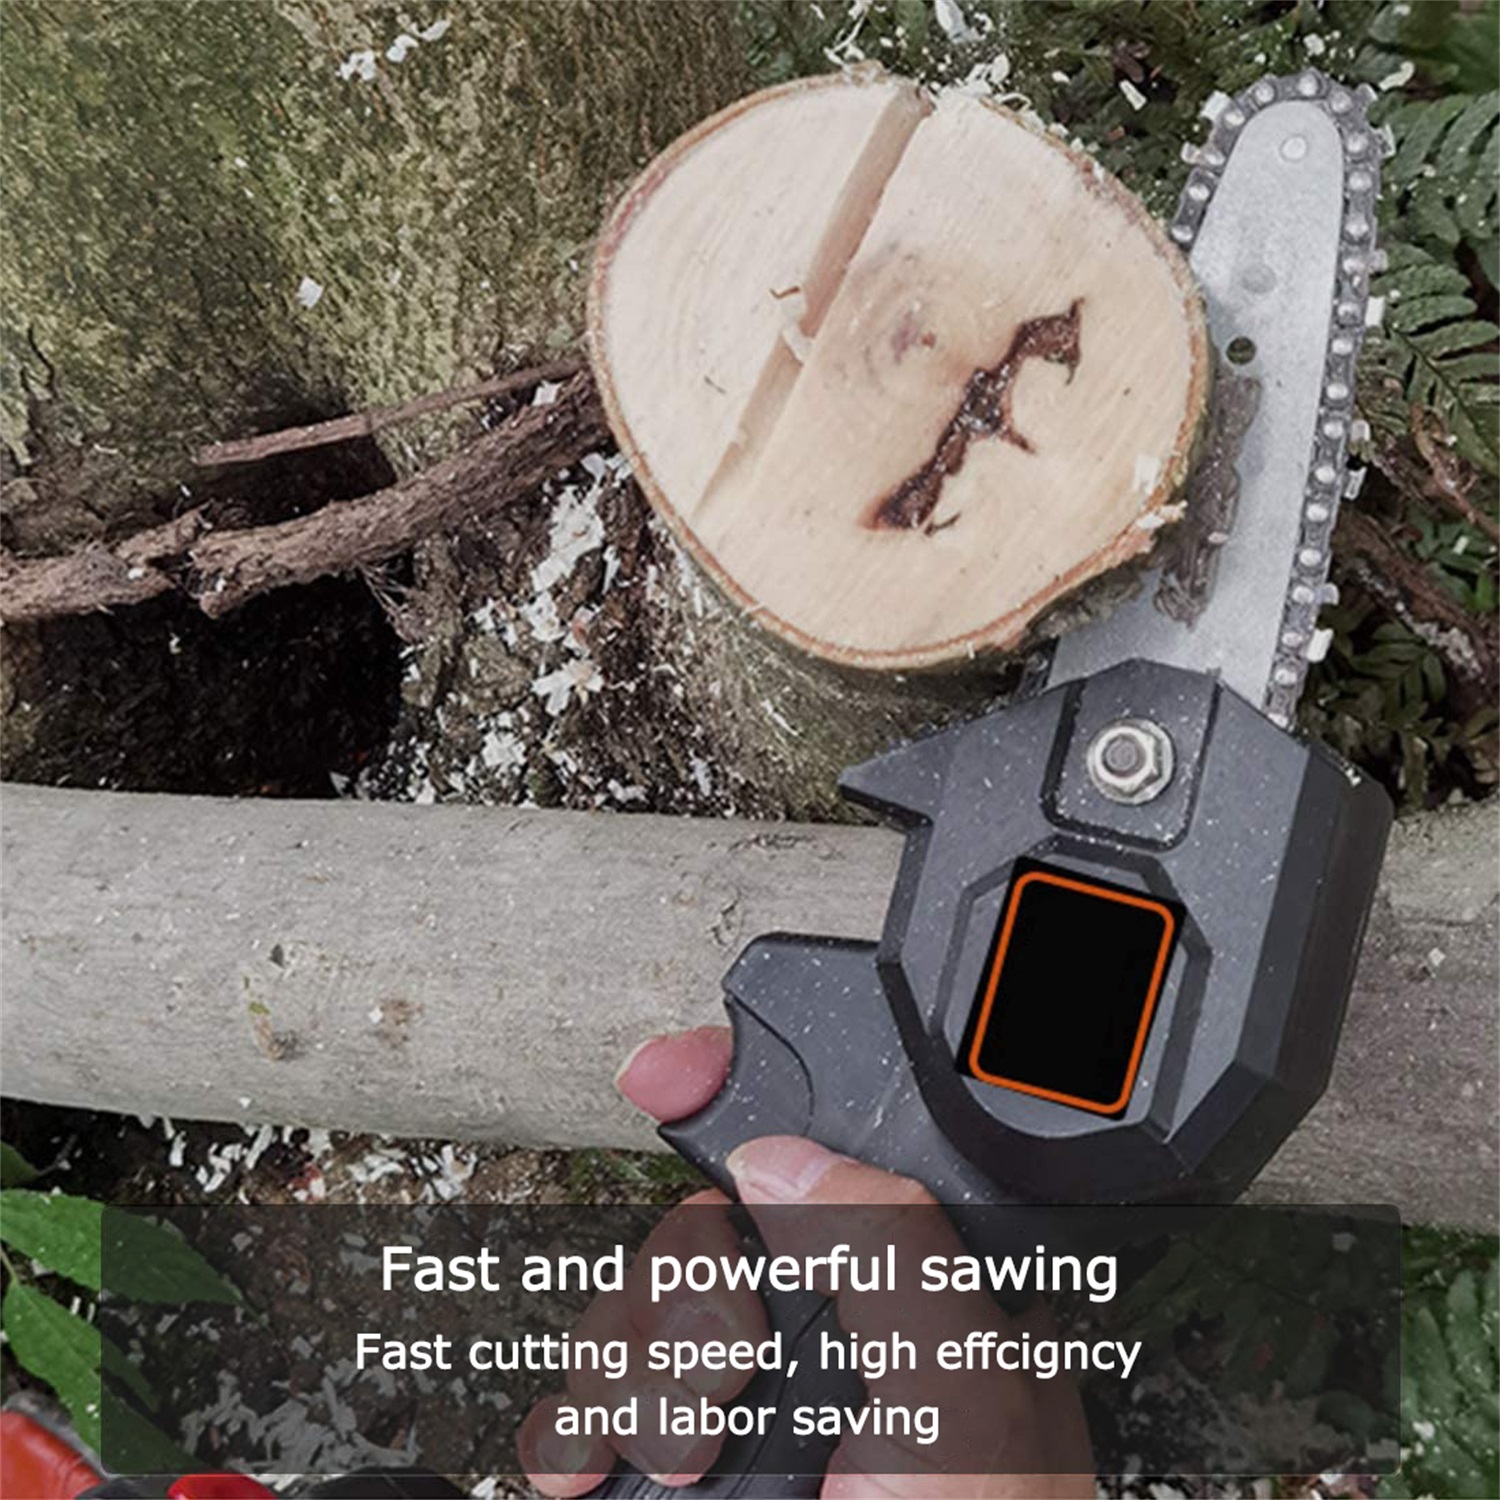 Portable Mini Chainsaw, 4 Inch Cordless Electric Protable Chainsaw with Brushless Motor, 24V Electric Hand Chainsaw, One-Hand Lightweight Chainsaw, Great for Tree Branch Wood Cutting - image 5 of 7